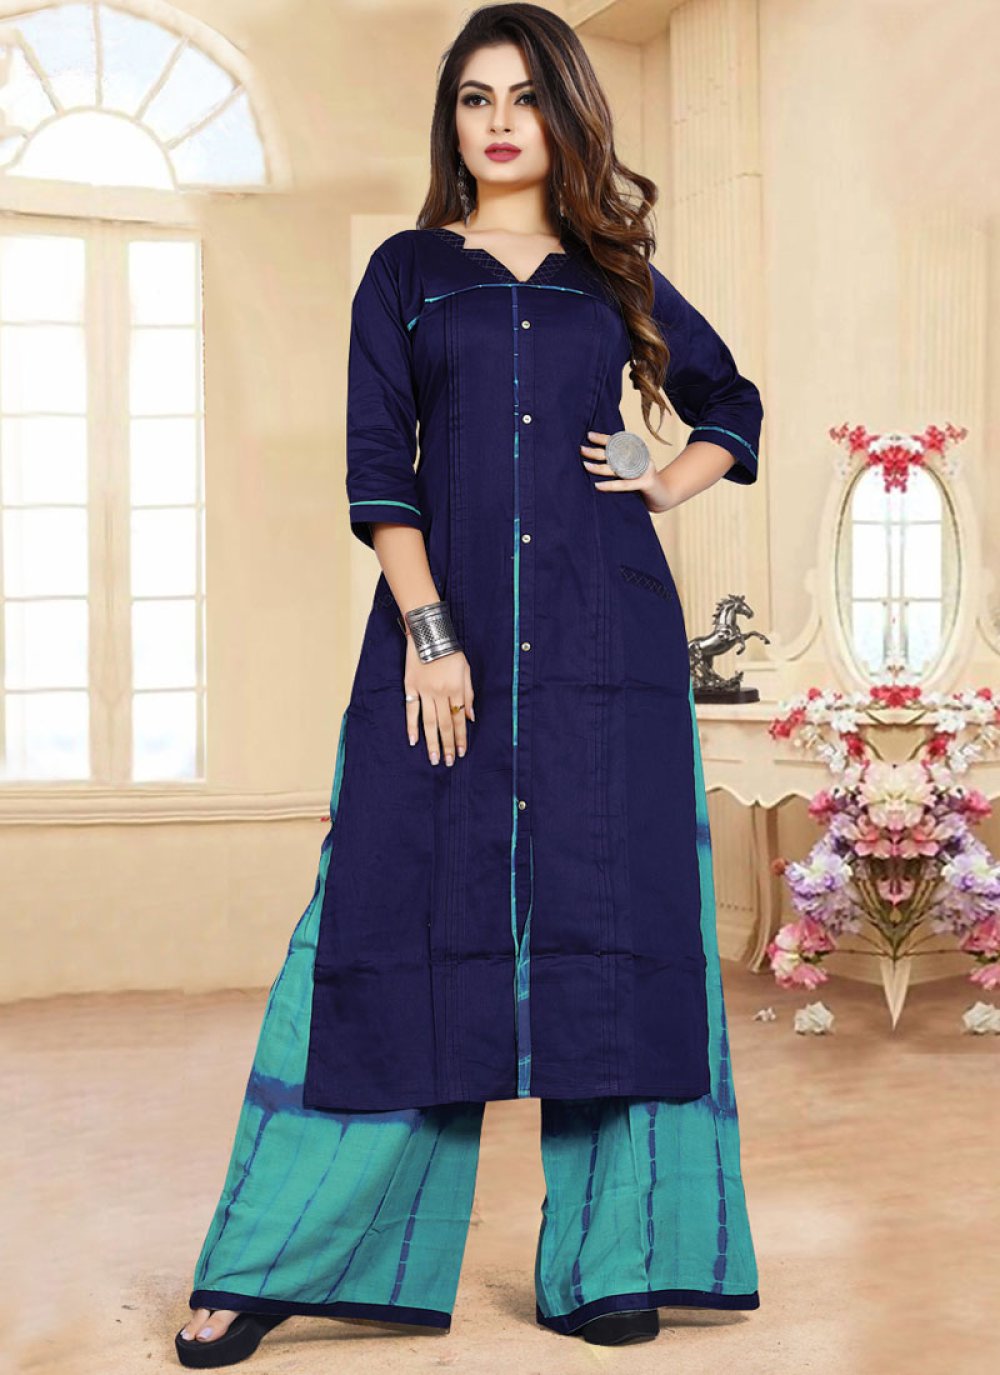 Embroidered Cotton Party Wear Kurti